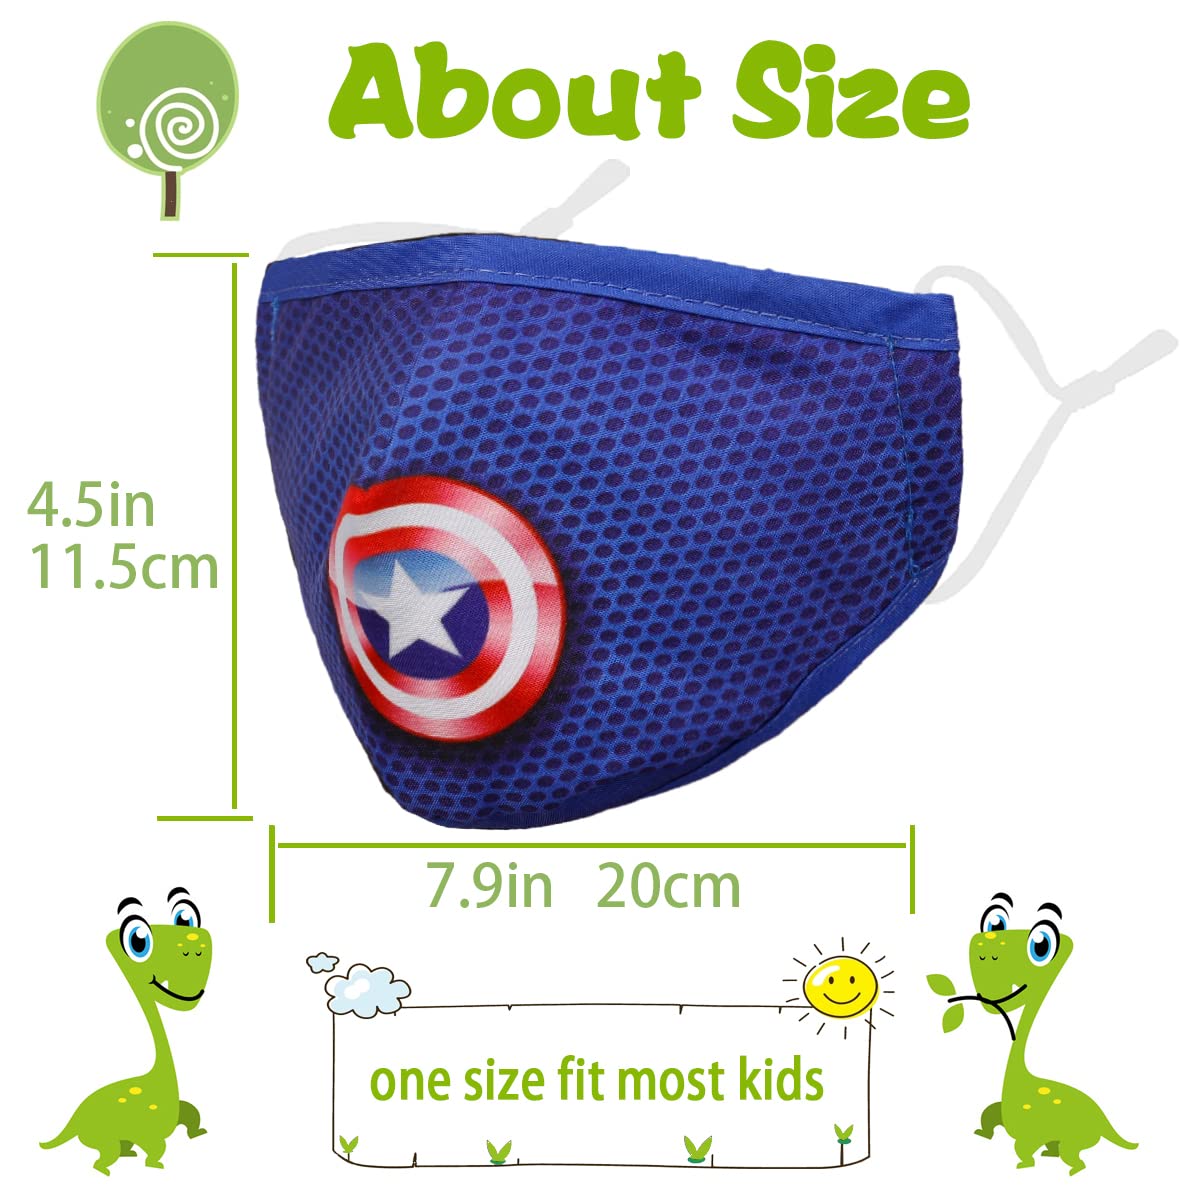 Washable Reusable Kids Face Mask, Cloth Cotton Cute Designer Breathable Facemask mascarillas niños, Design Fashion Fabric Covering with Adjustable Ear Loops for Girl Boy Gift